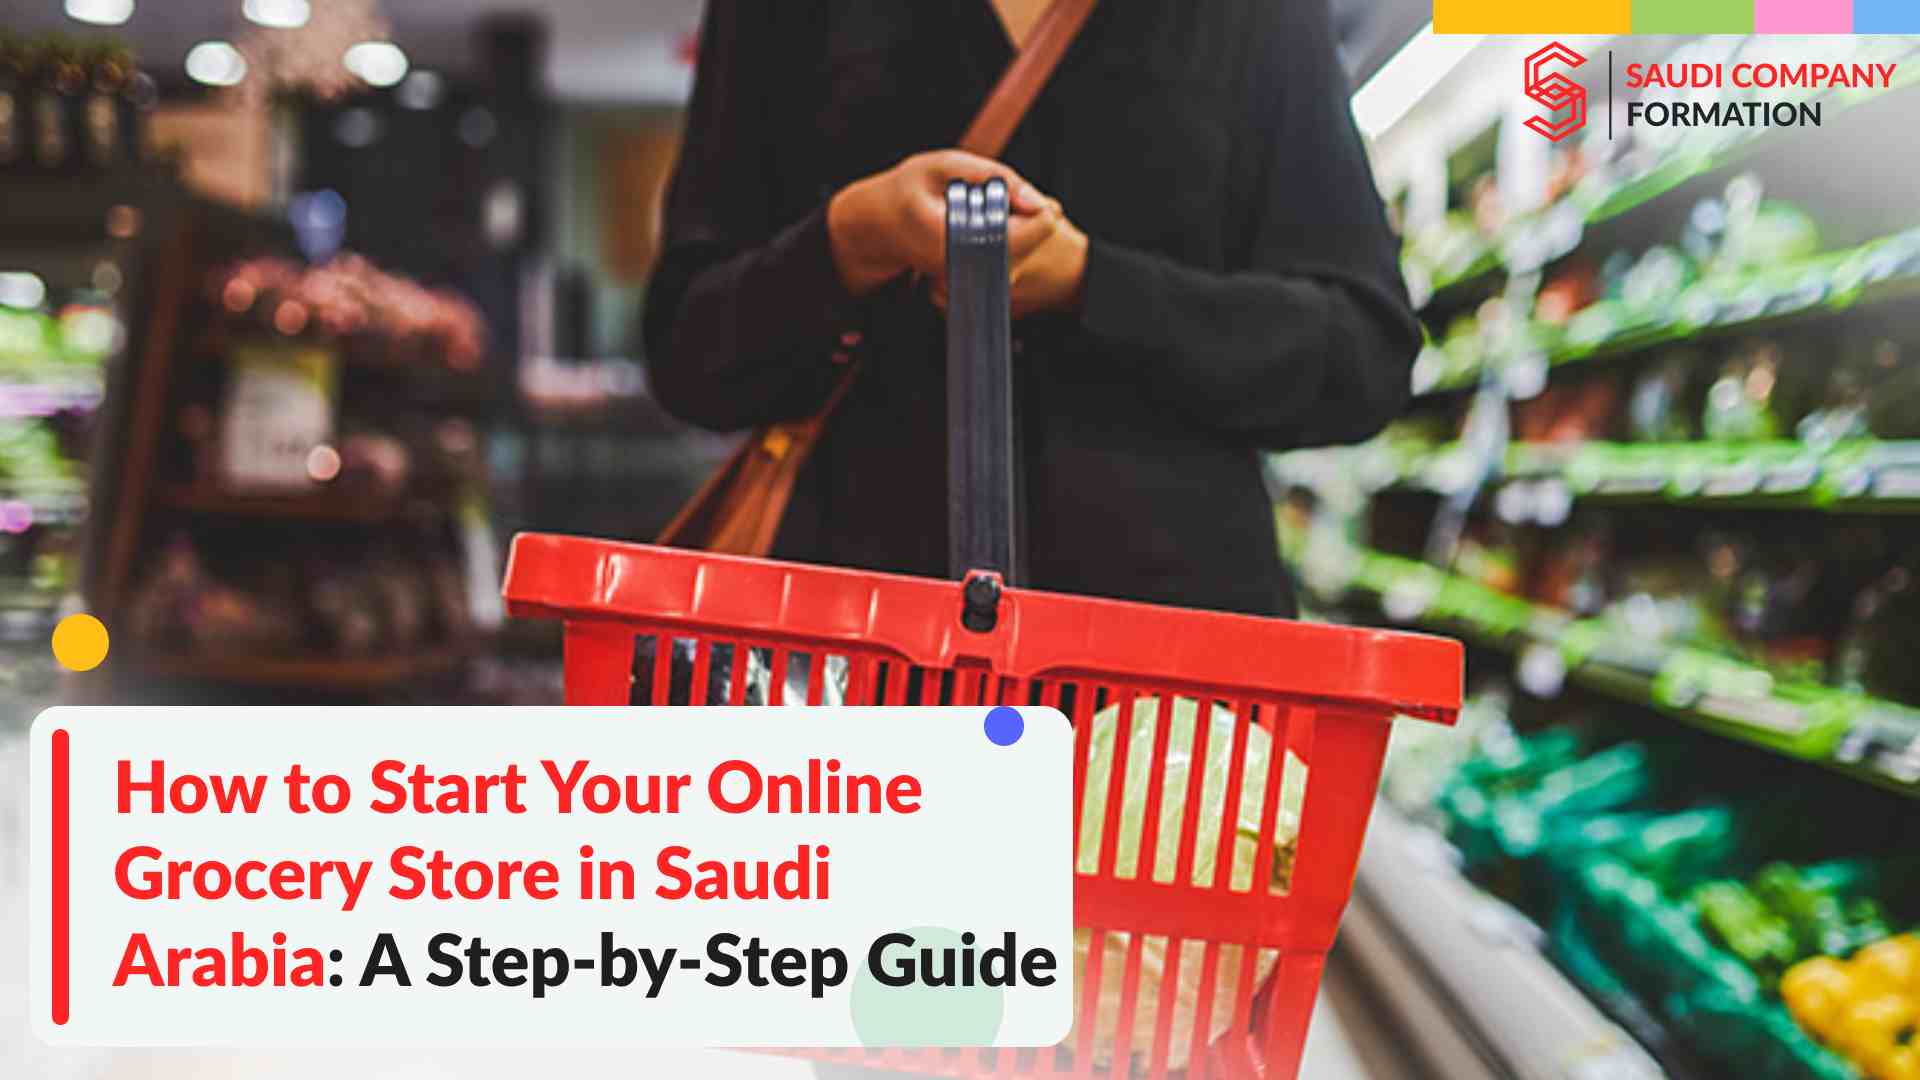 How to Start Your Online Grocery Store in Saudi Arabia: A Step-by-Step Guide